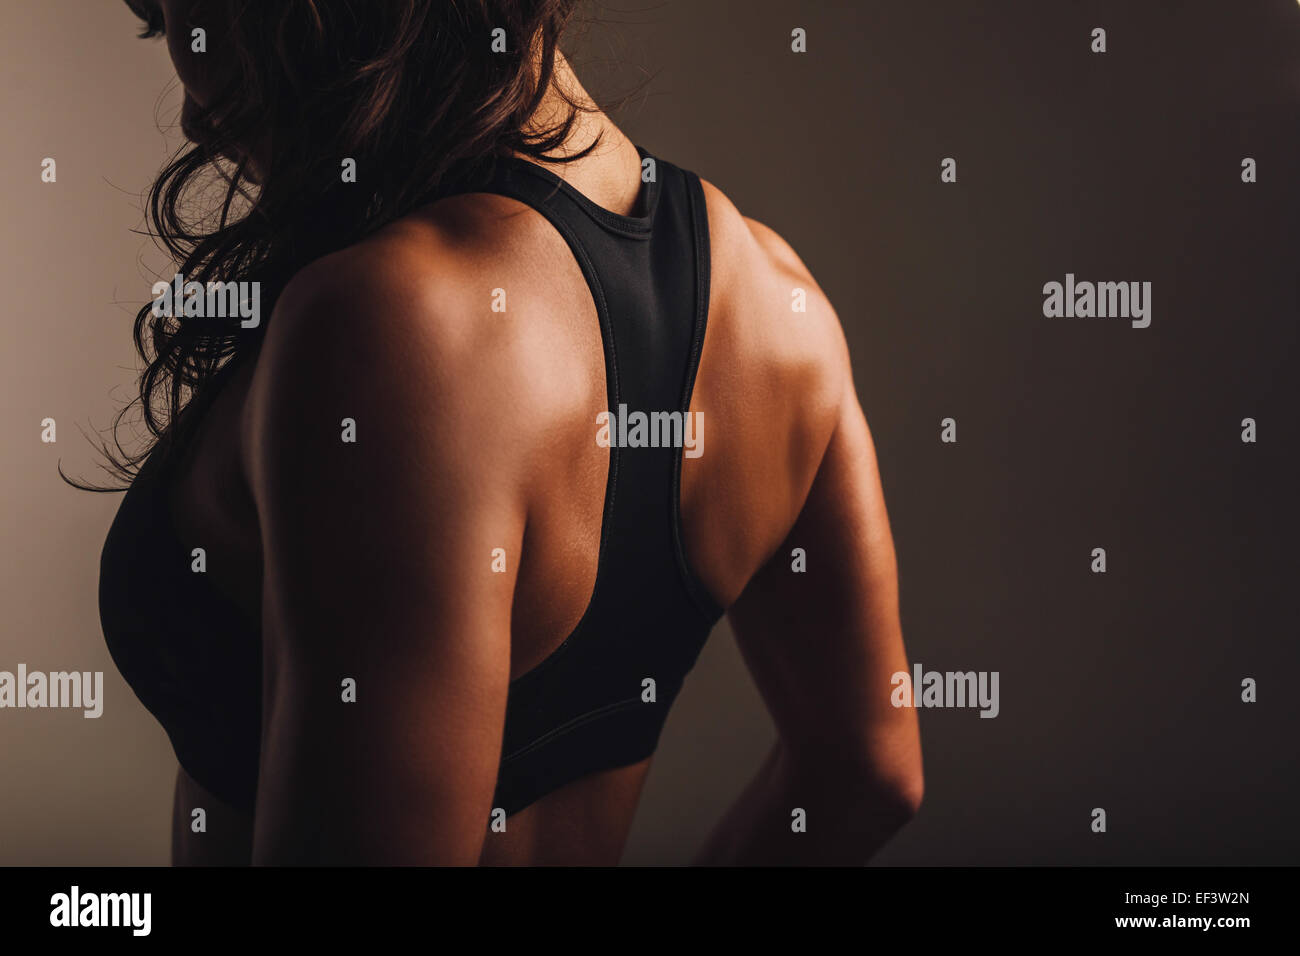 https://c8.alamy.com/comp/EF3W2N/rear-view-of-strong-young-woman-wearing-sports-bra-muscular-back-of-EF3W2N.jpg